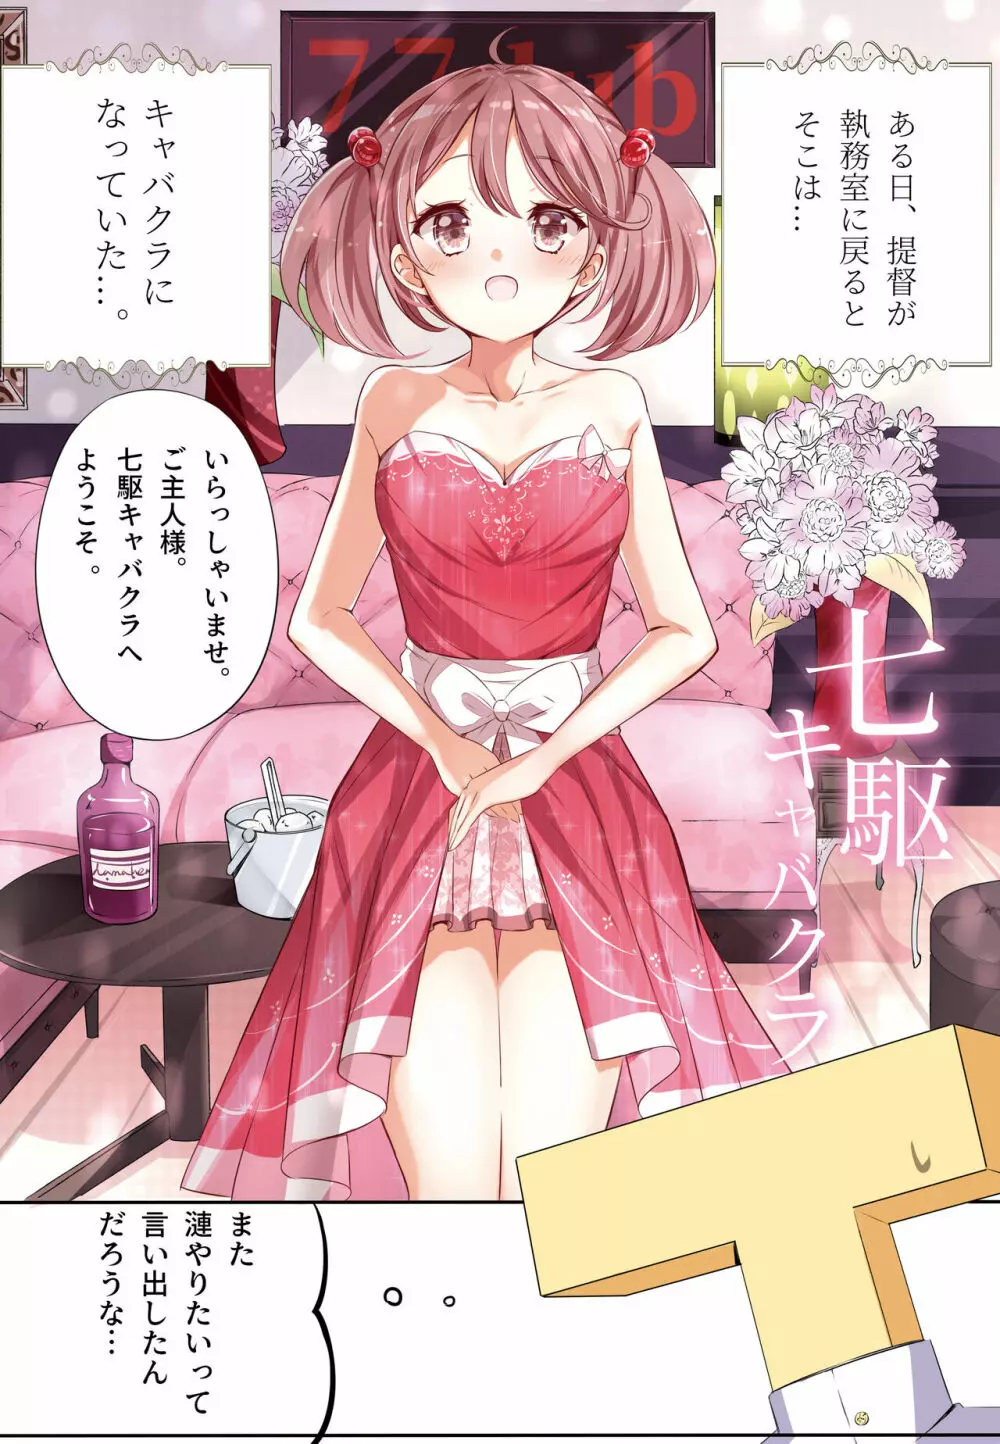 hamaken collection 総集編vol 9～12 プラス 七駆の乳くらべ Page.14